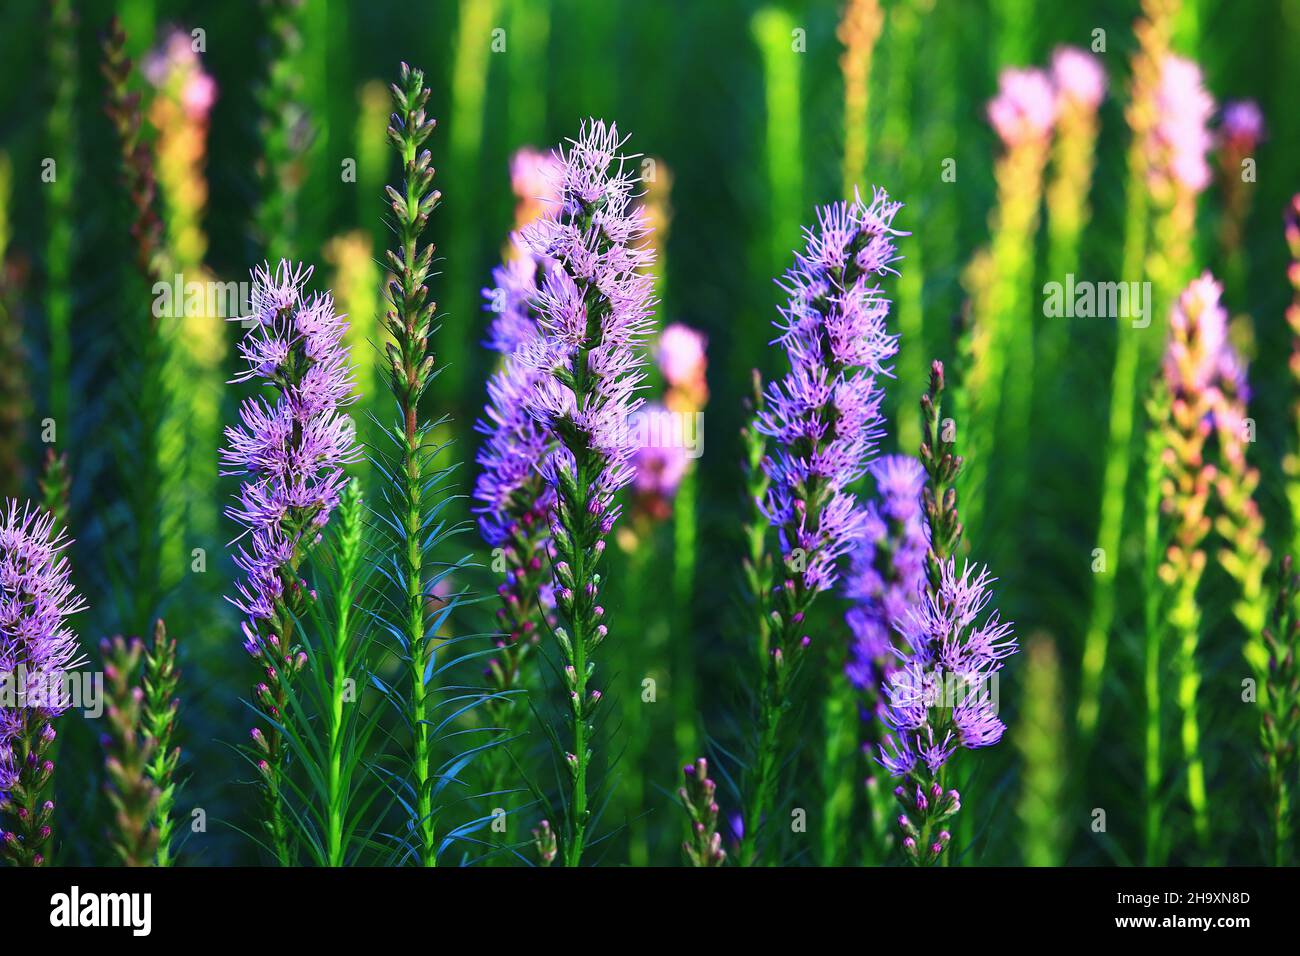 Spike Gayfeather,Button Snakeroot,Dense Blazing Star flowers close-up,beautiful blue with purple flowers blooming in the garden Stock Photo